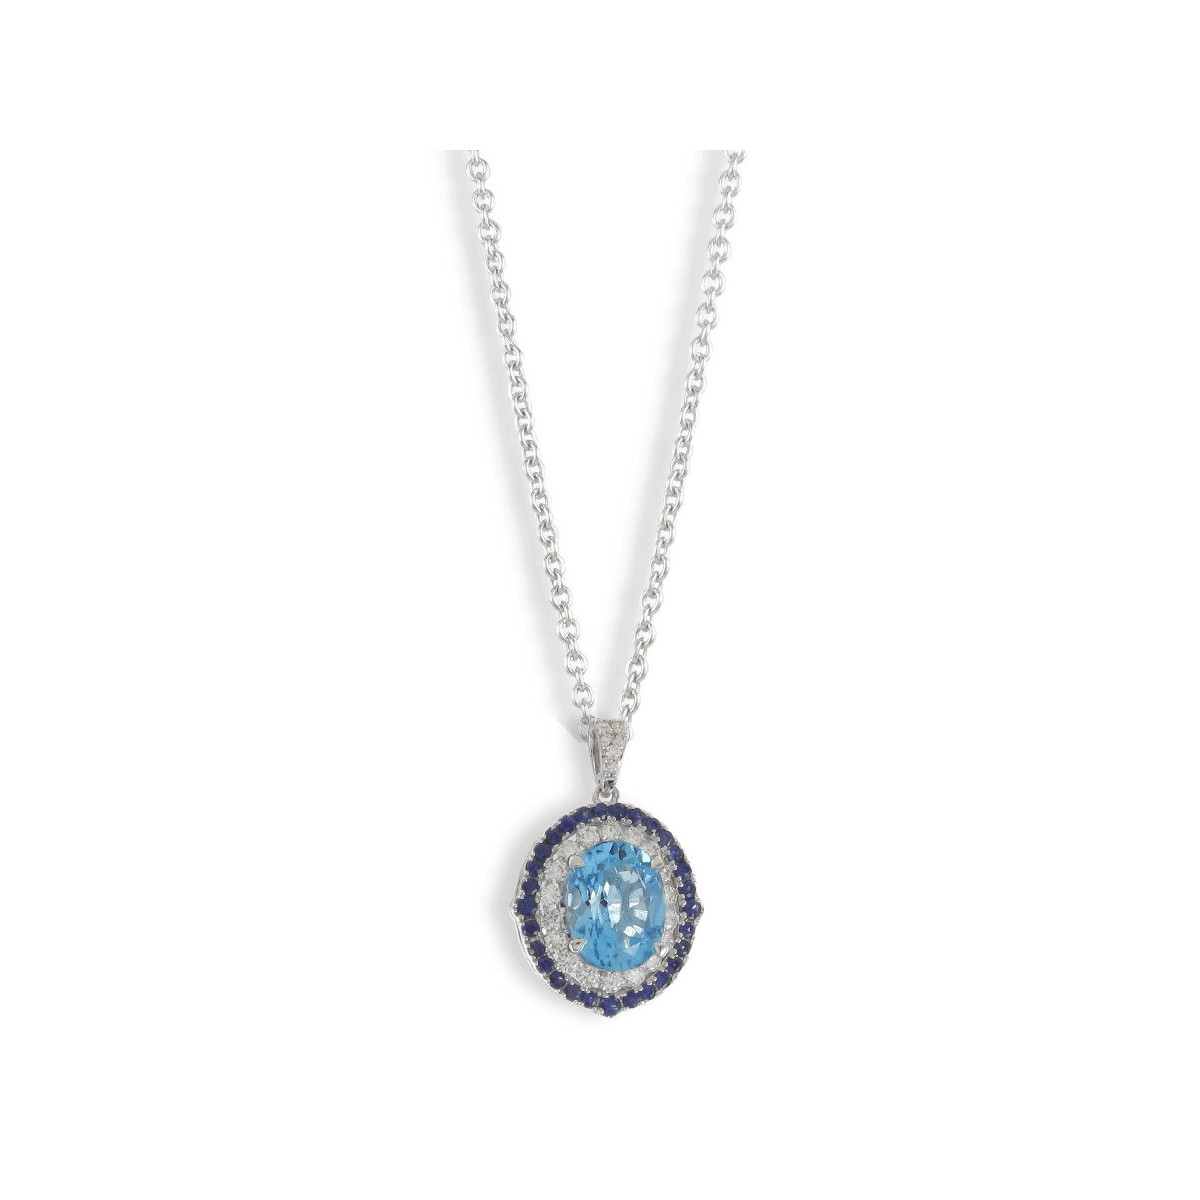 PENDANT WITH BLUE OVAL TOPAZ